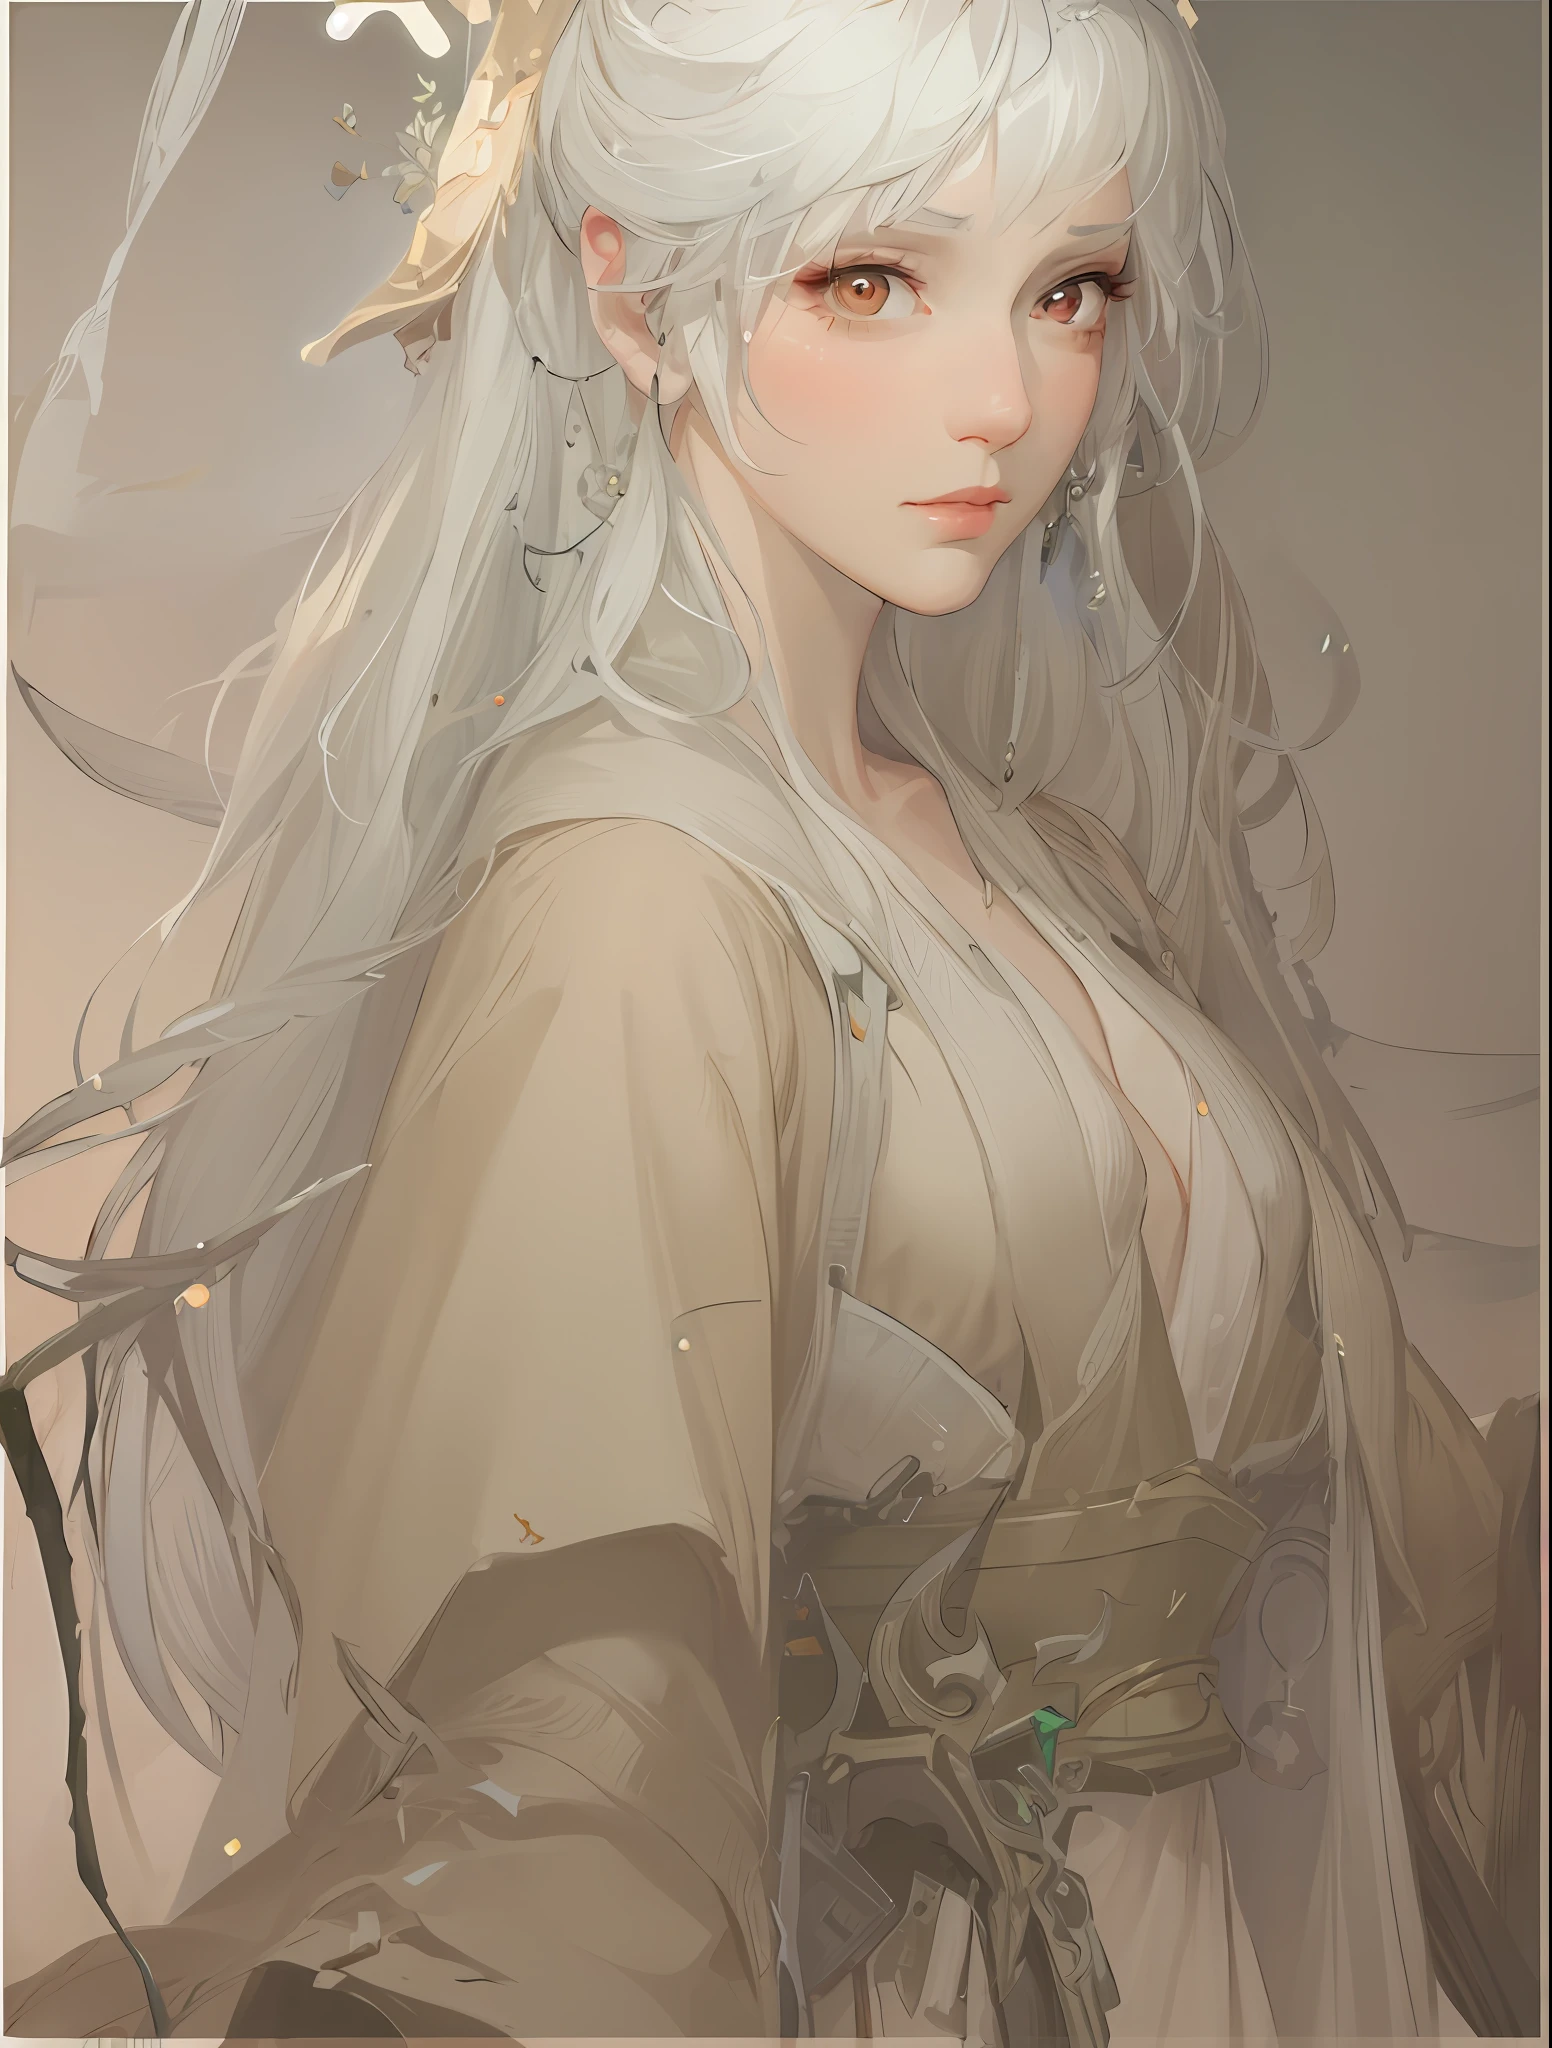 a close up of a woman with white hair and a white mask, beautiful character painting, guweiz, artwork in the style of guweiz, white haired deity, by Yang J, epic exquisite character art, stunning character art, by Fan Qi, by Wuzhun Shifan, guweiz on pixiv artstation